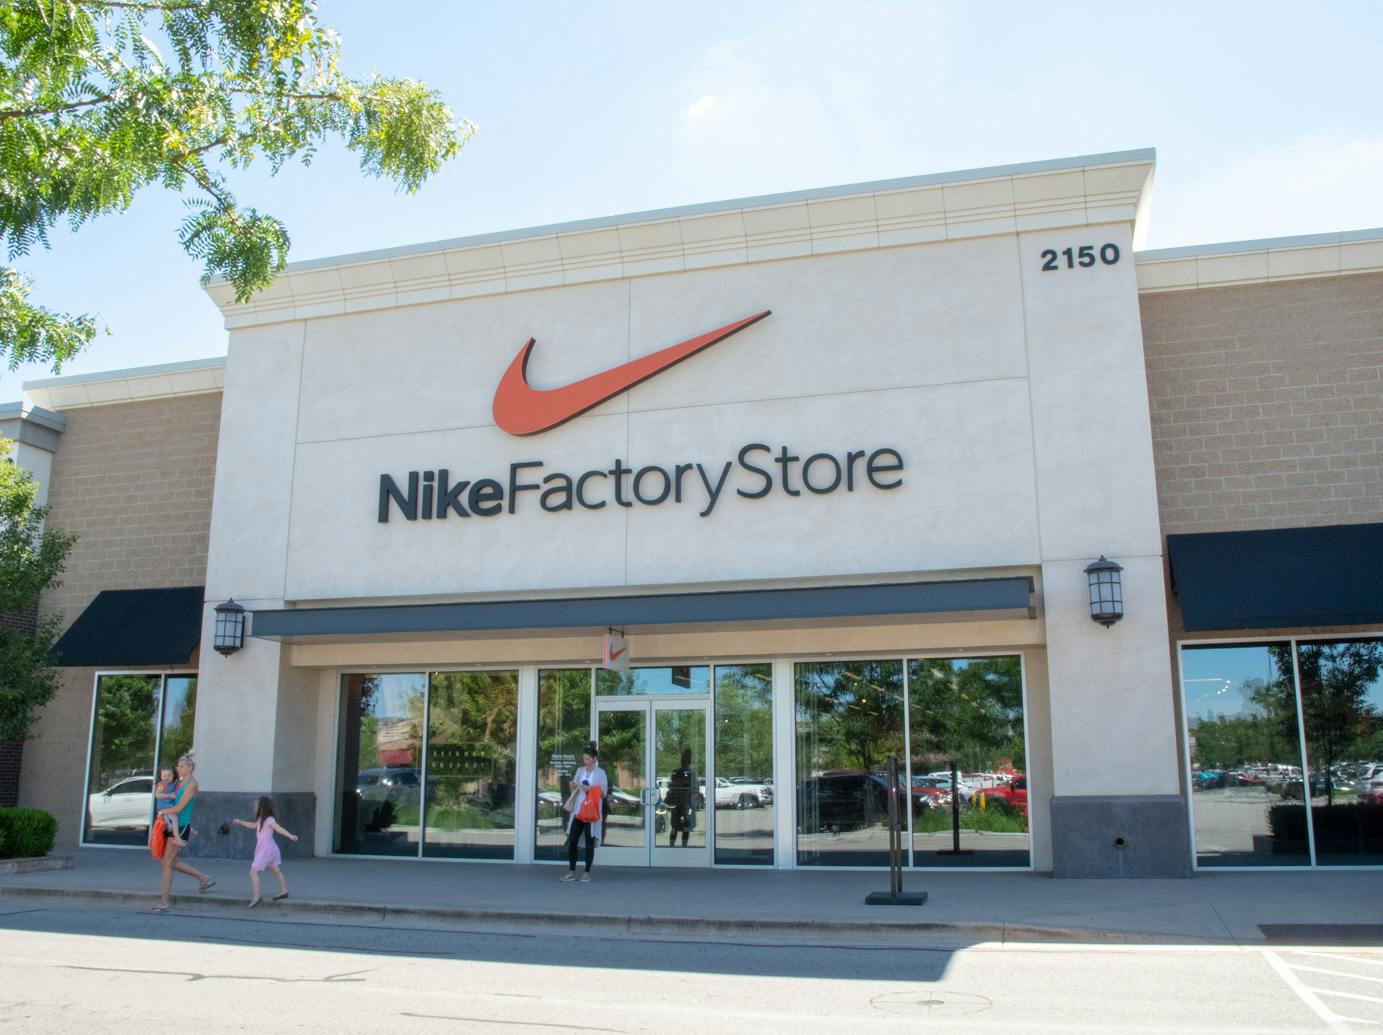 Nike Factory Outlet Sale Tips to Help Save on Kicks - Krazy Coupon Lady